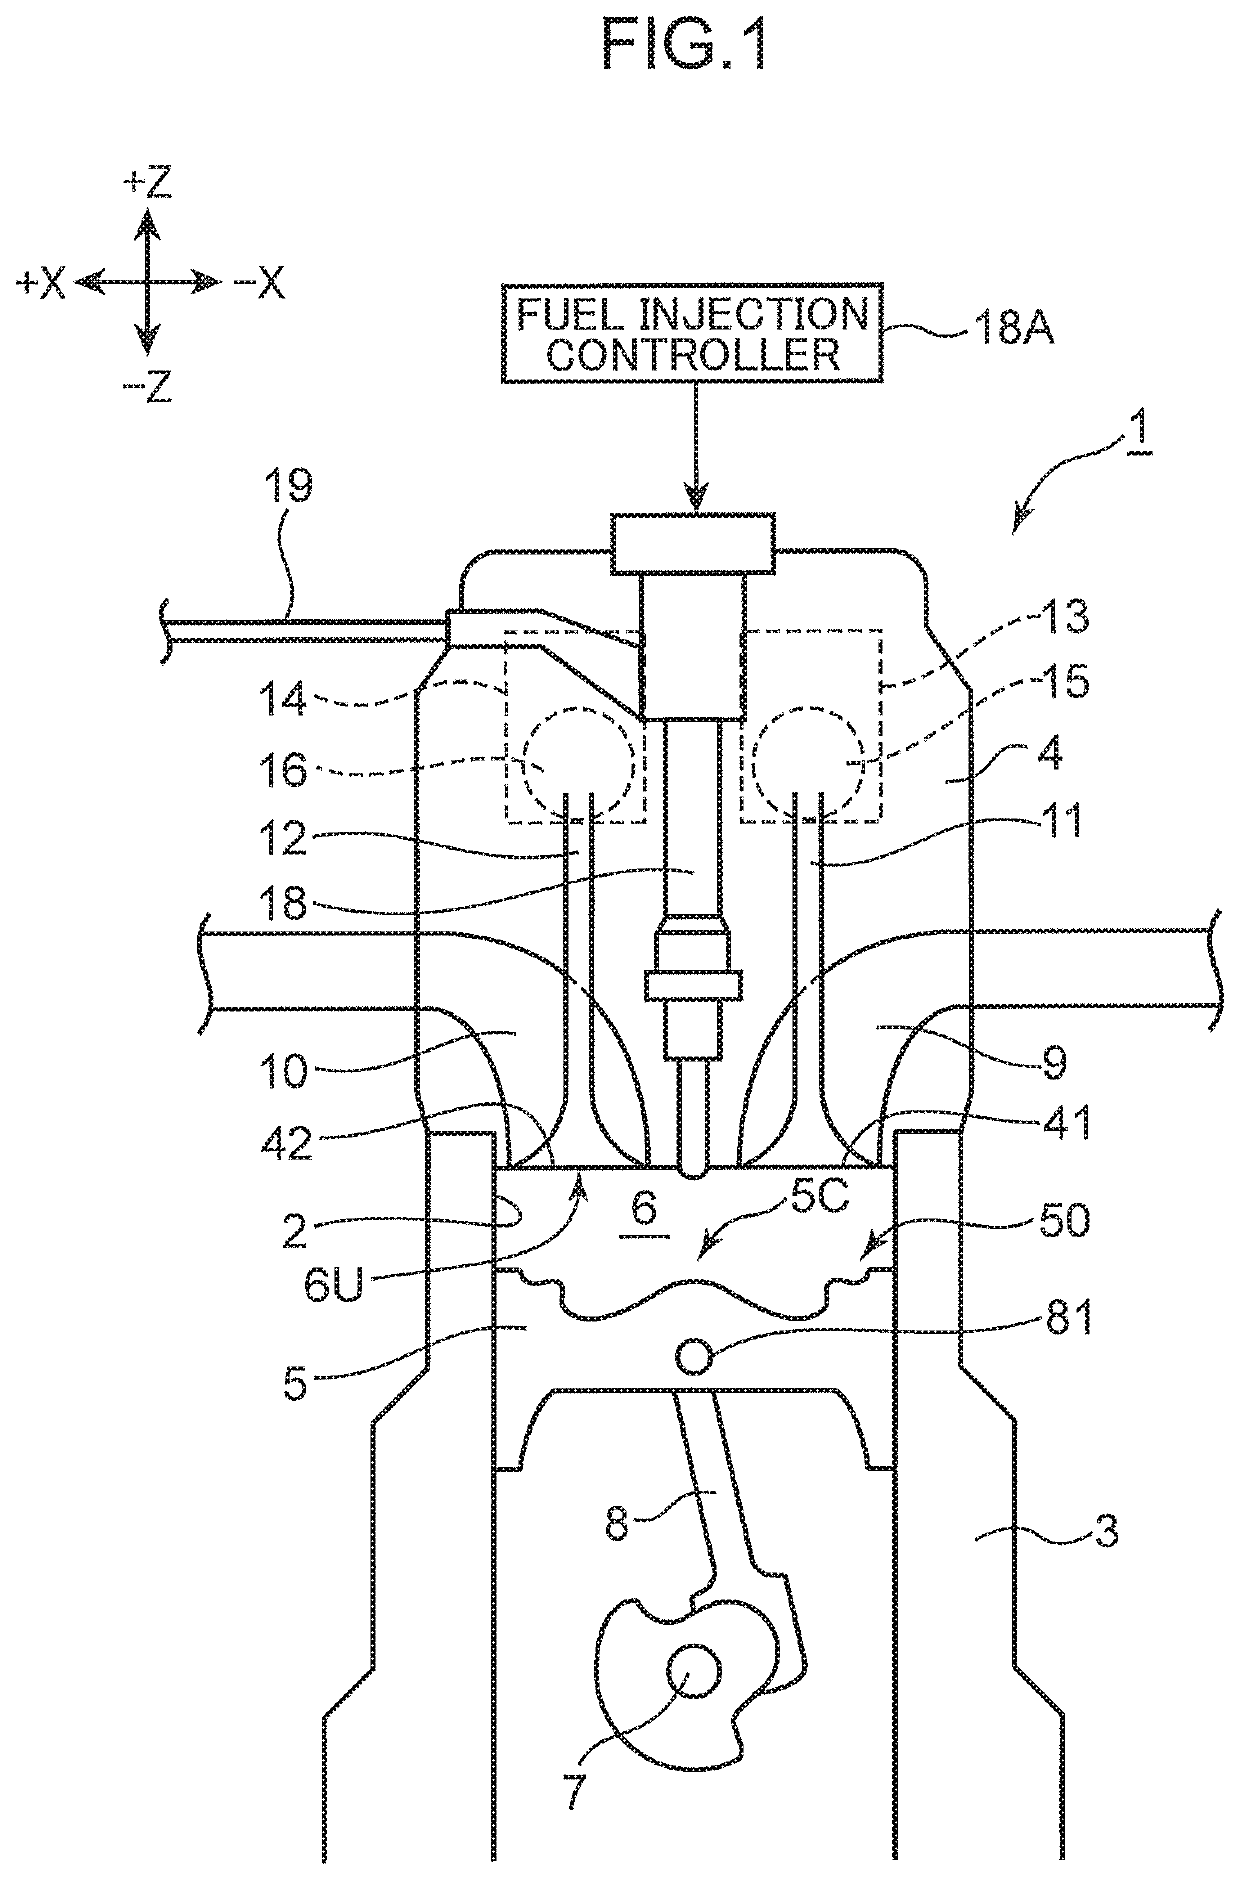 Combustion chamber structure of engine